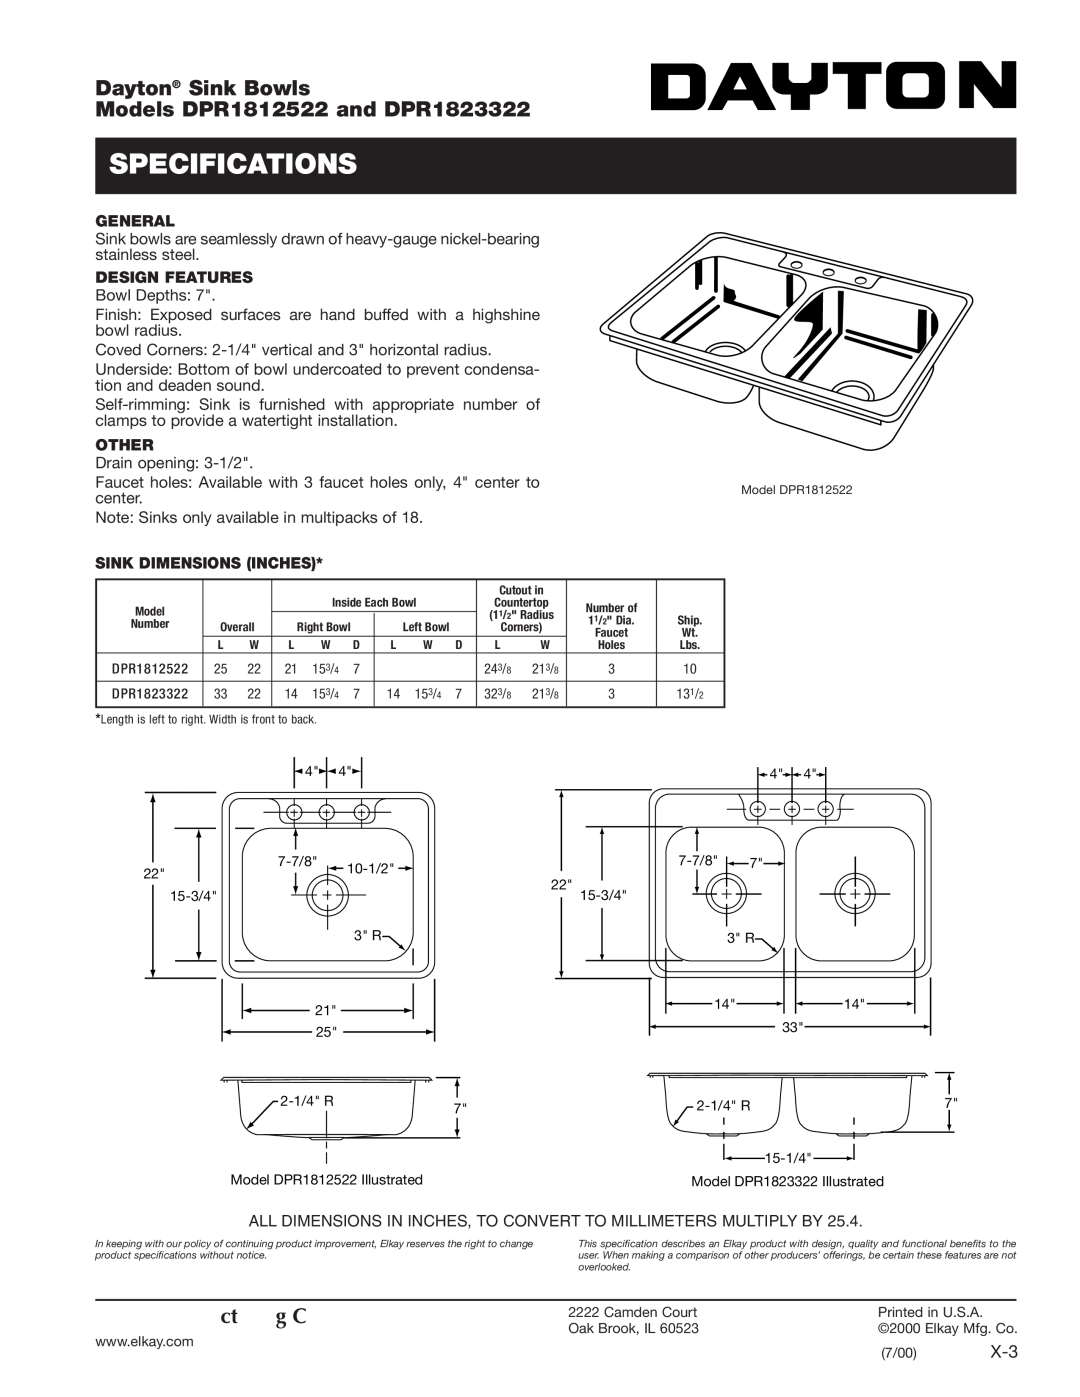 Dayton specifications Specifications, Dayton Sink Bowls, Models DPR1812522 and DPR1823322, Elkay Manufacturing Company 